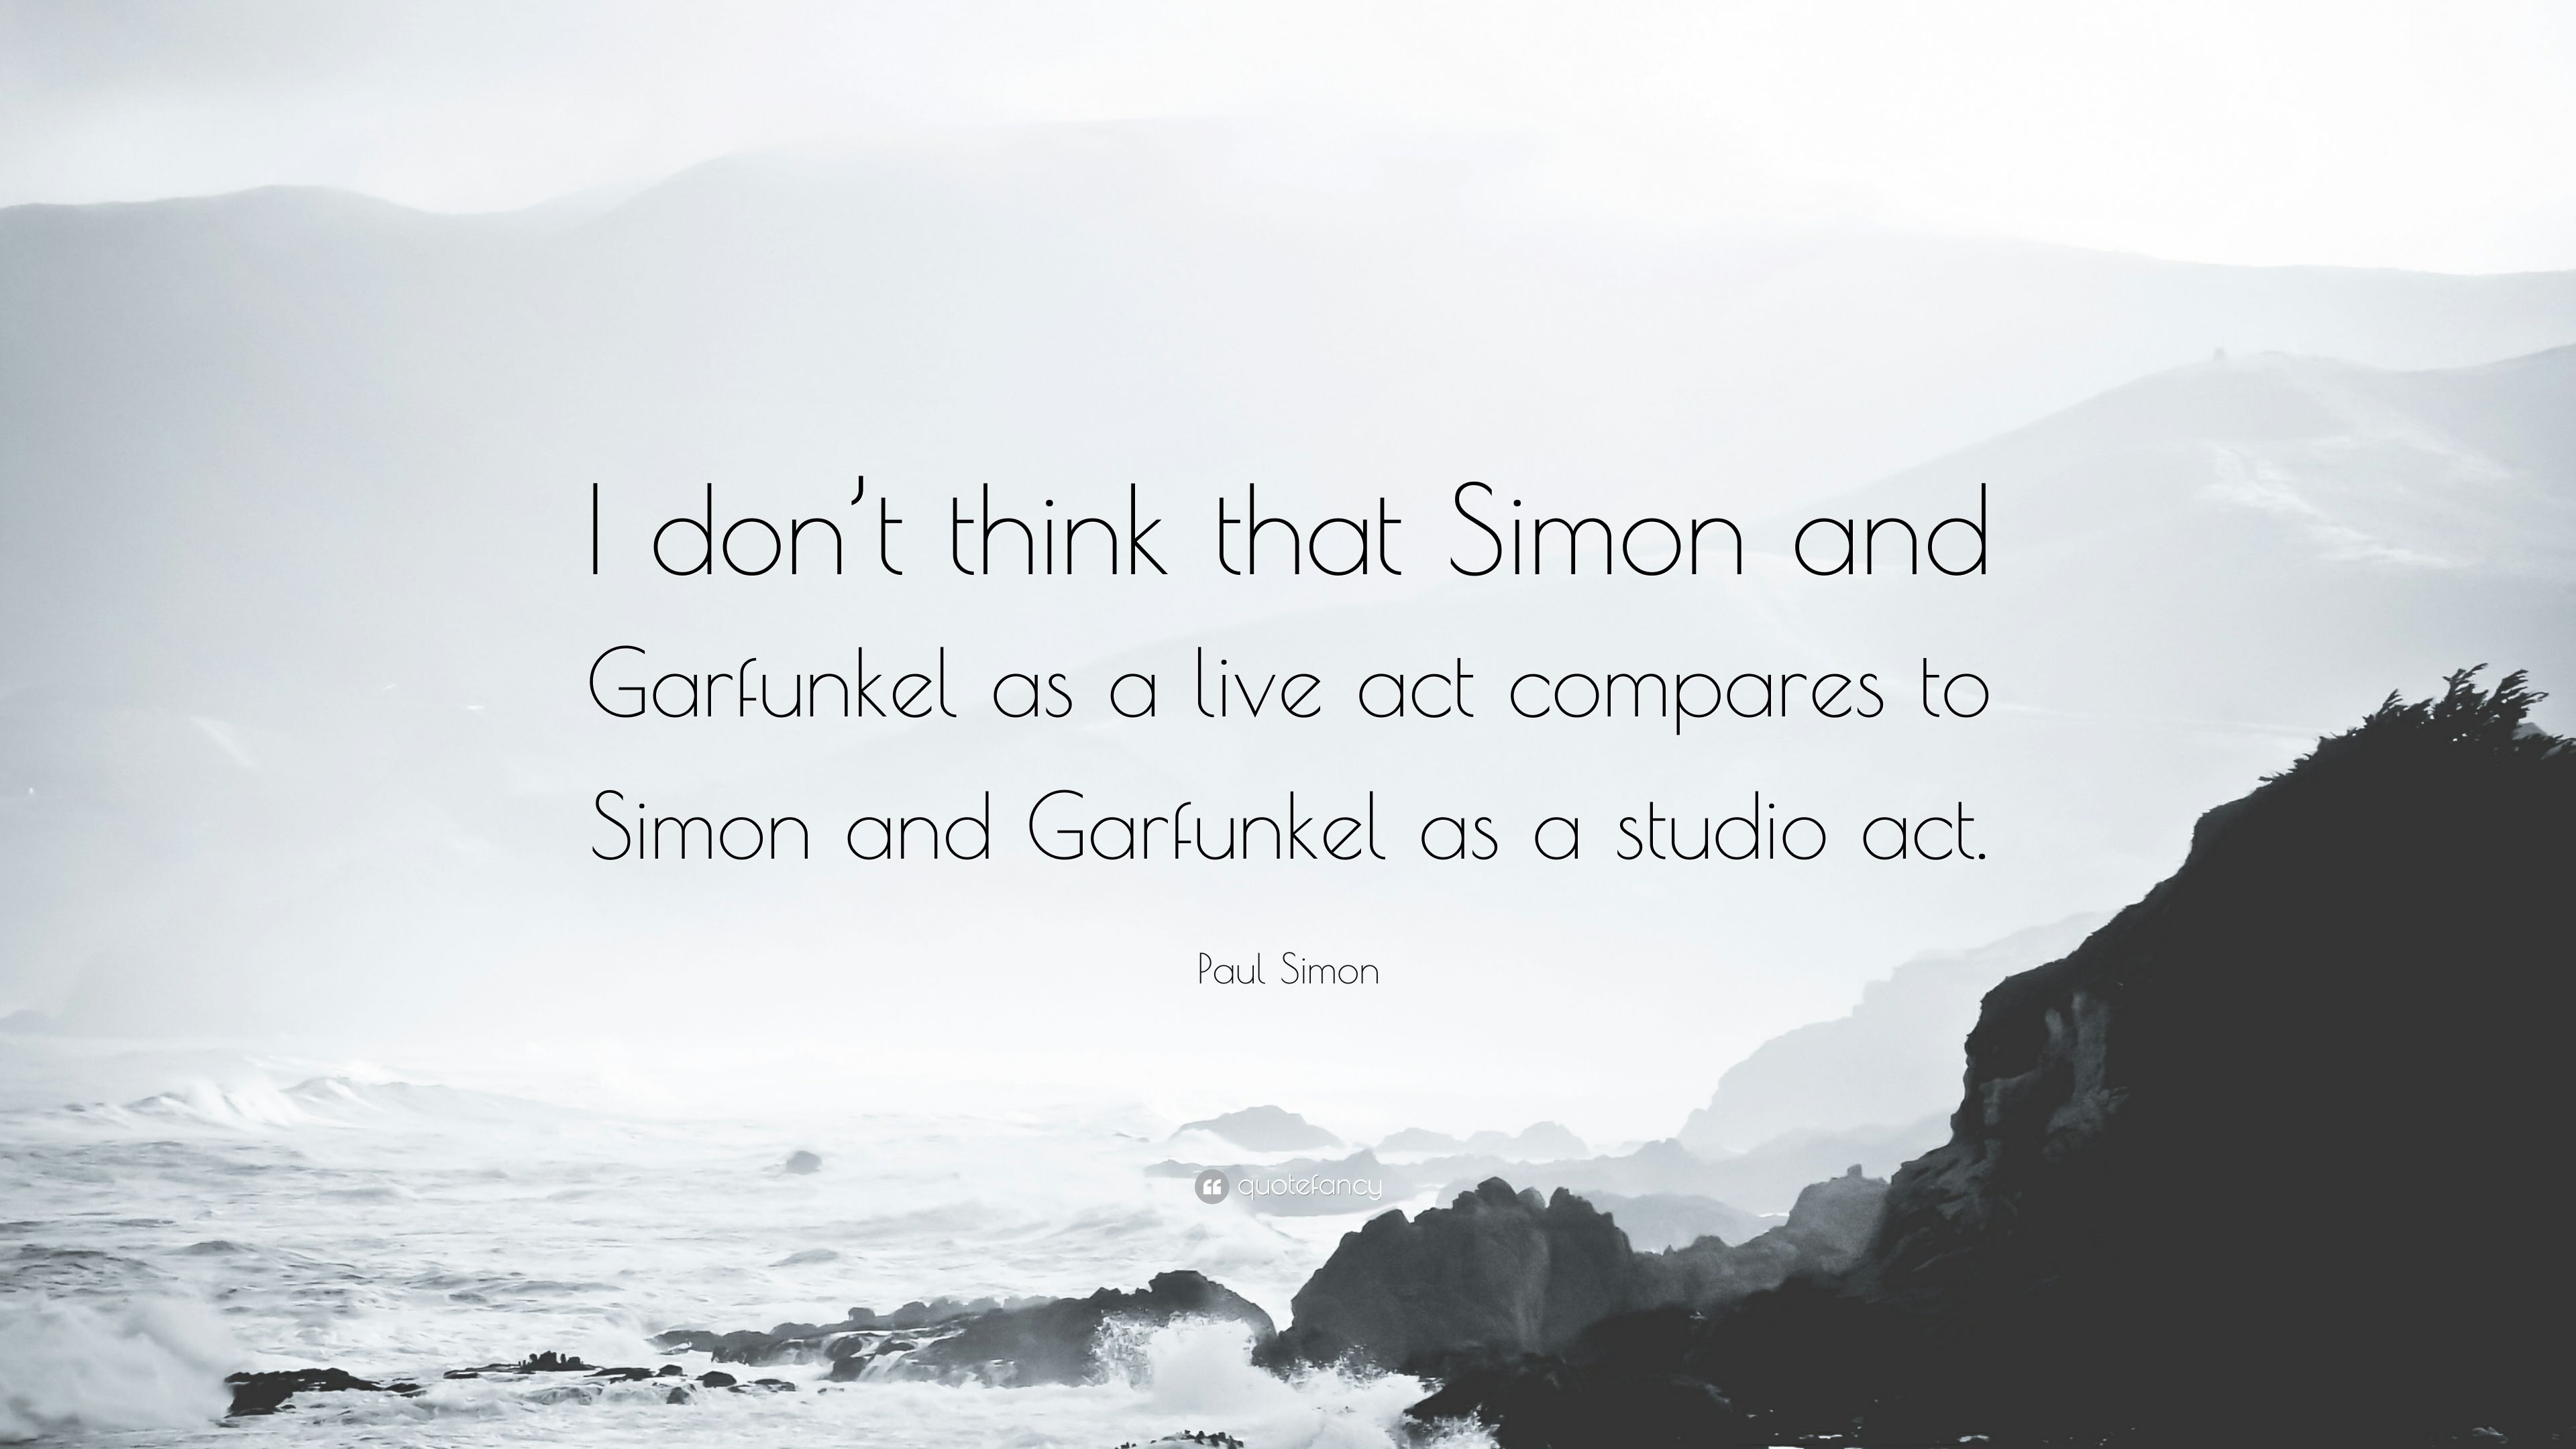 Paul Simon Quote: “I don't think that Simon and Garfunkel as a